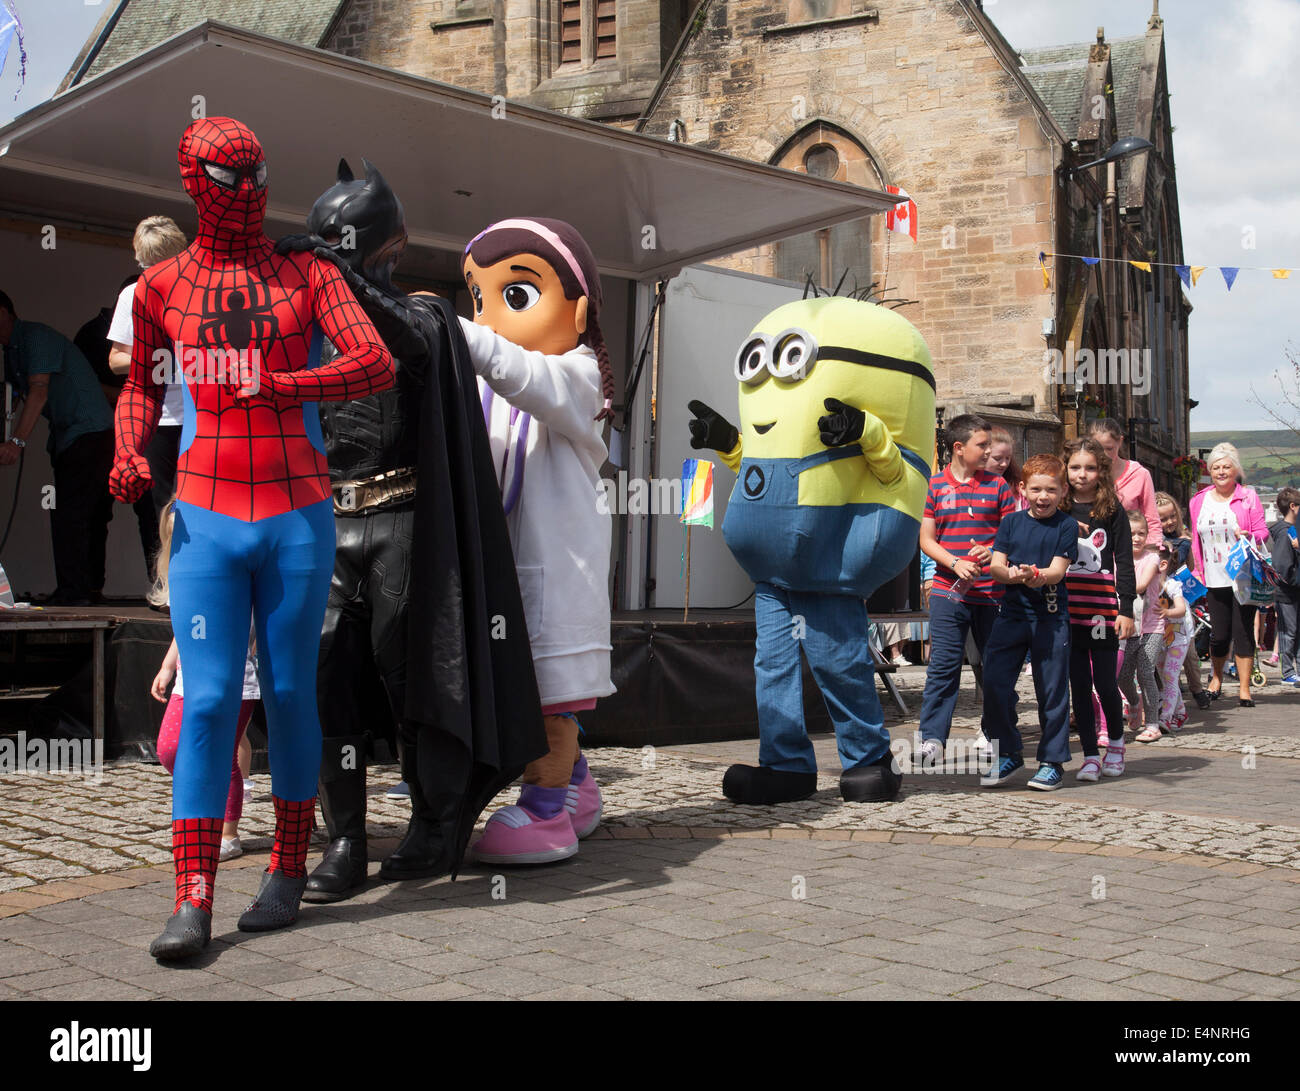 Ayrshire, Scotland, UK. 15th July, 2014. Spiderman and Batman lead a conga dance while waiting for the Queen's Baton Relay for the Glasgow2014 Commonwealth Games passes through the town of Dalry in North Ayrshire, Scotland. Stock Photo